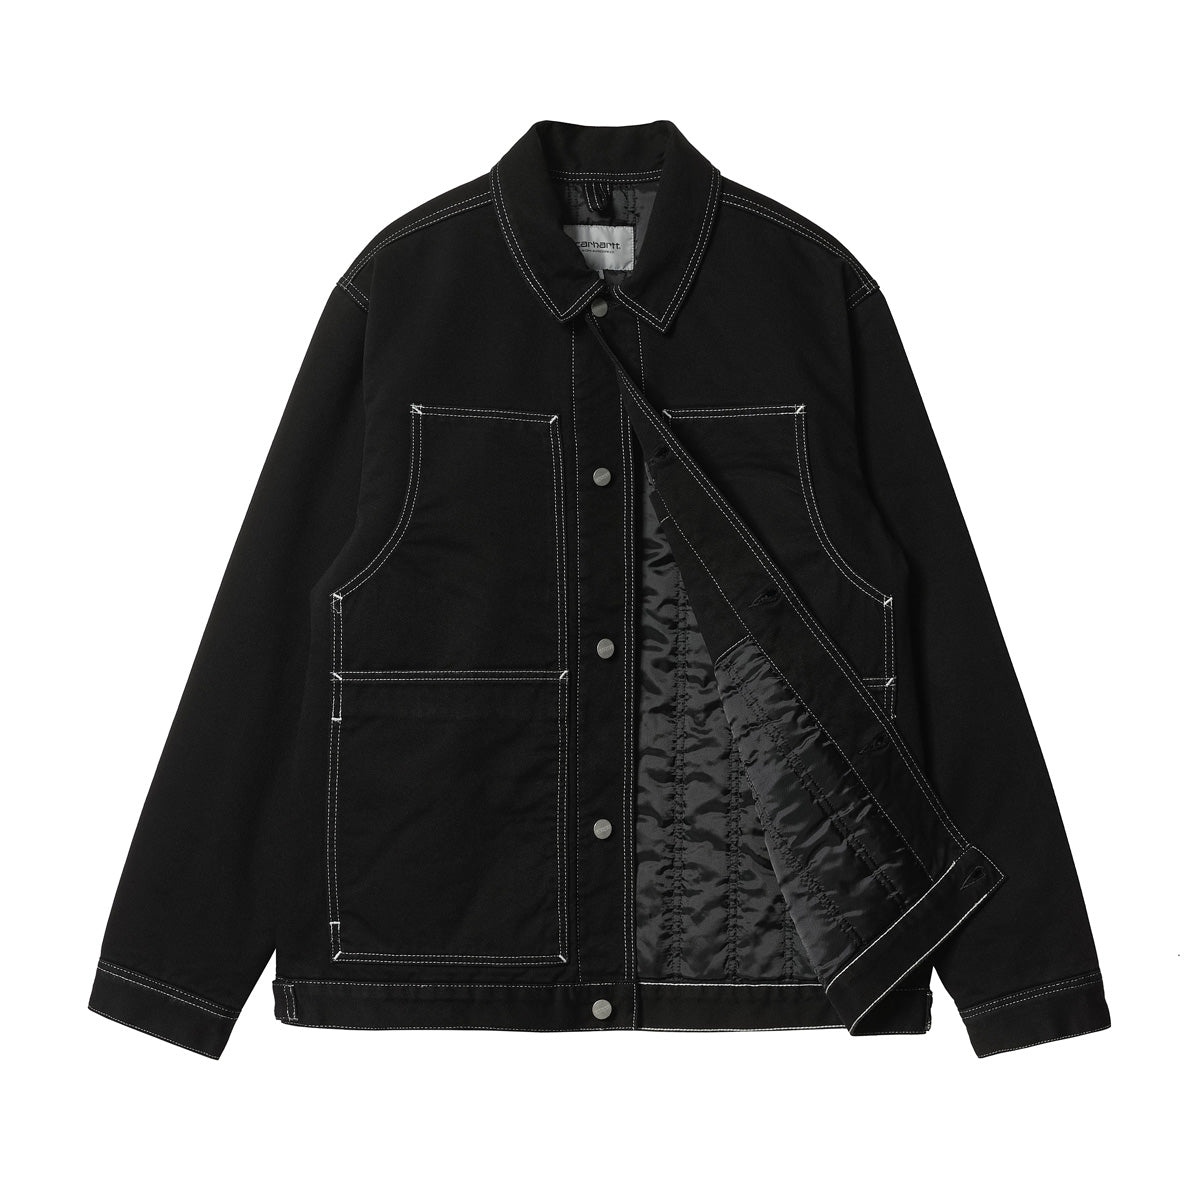 Carhartt WIP Double Front Jacket Black Rinsed